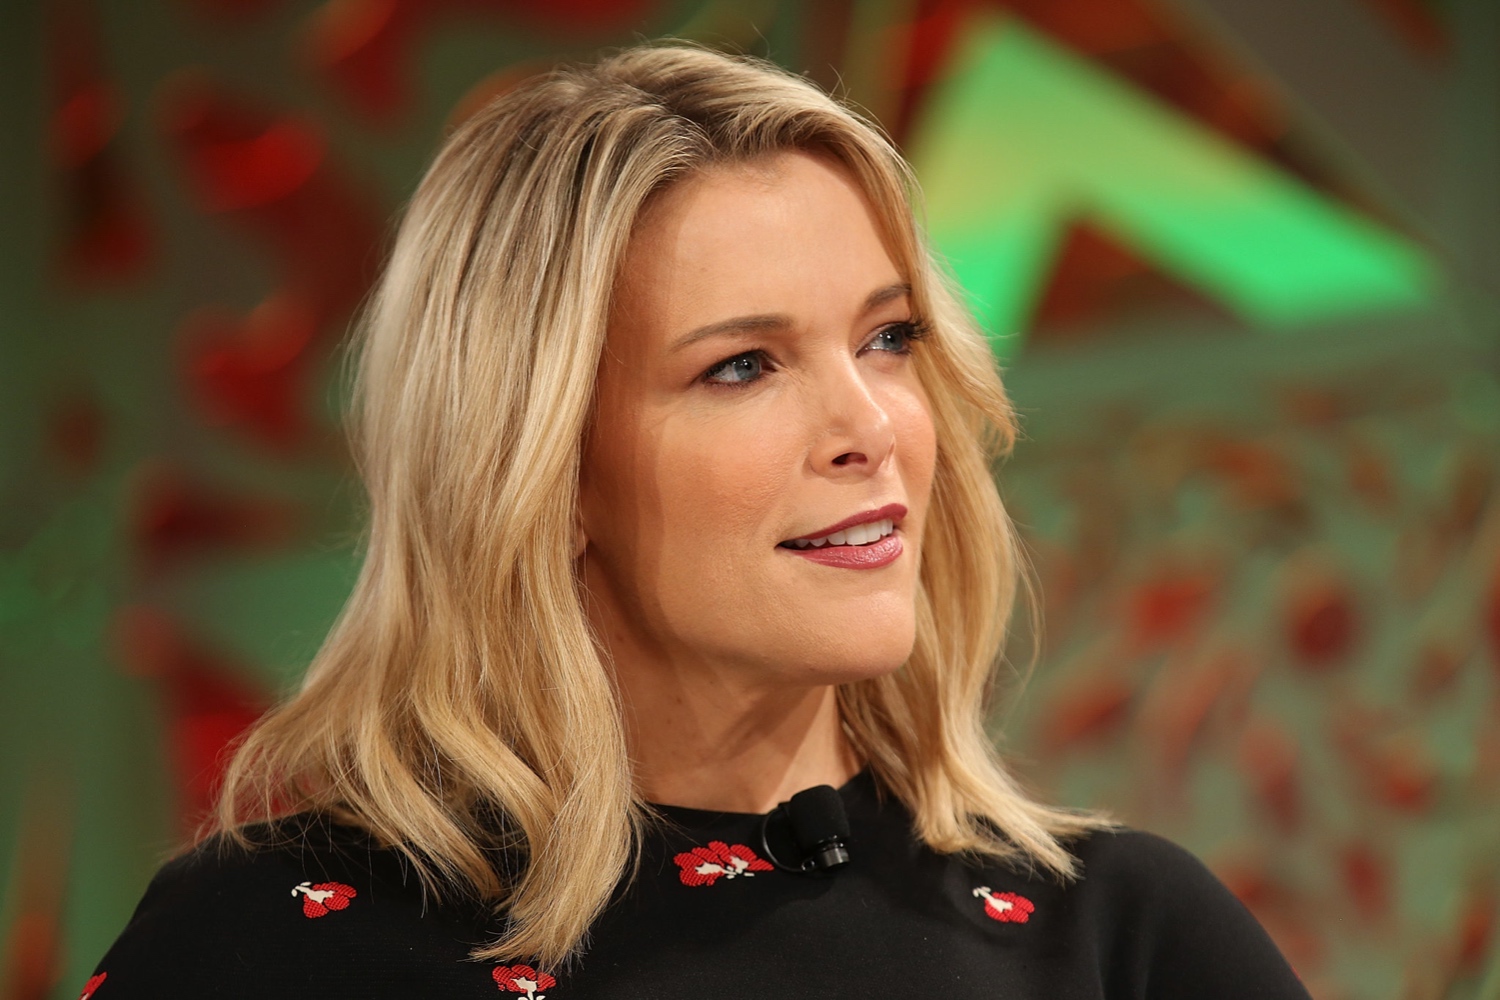 Megyn Kelly left Fox News in January 2017 for NBC and a contract reported to be worth $17 million a year.CreditCreditPhillip Faraone/Getty Images for Fortune